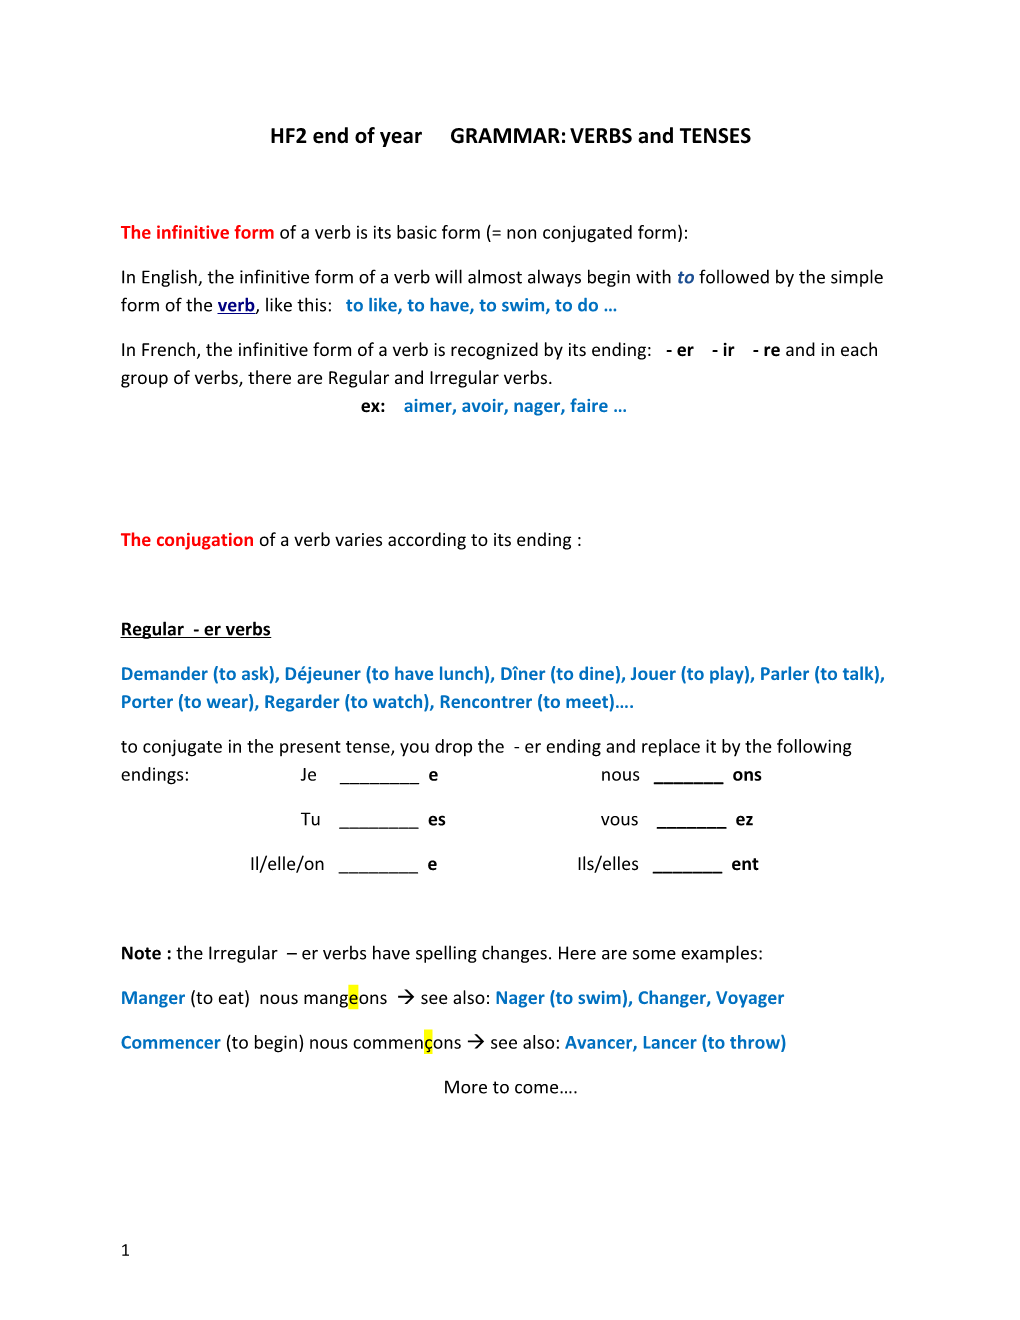 HF2 End of Year GRAMMAR:VERBS and TENSES